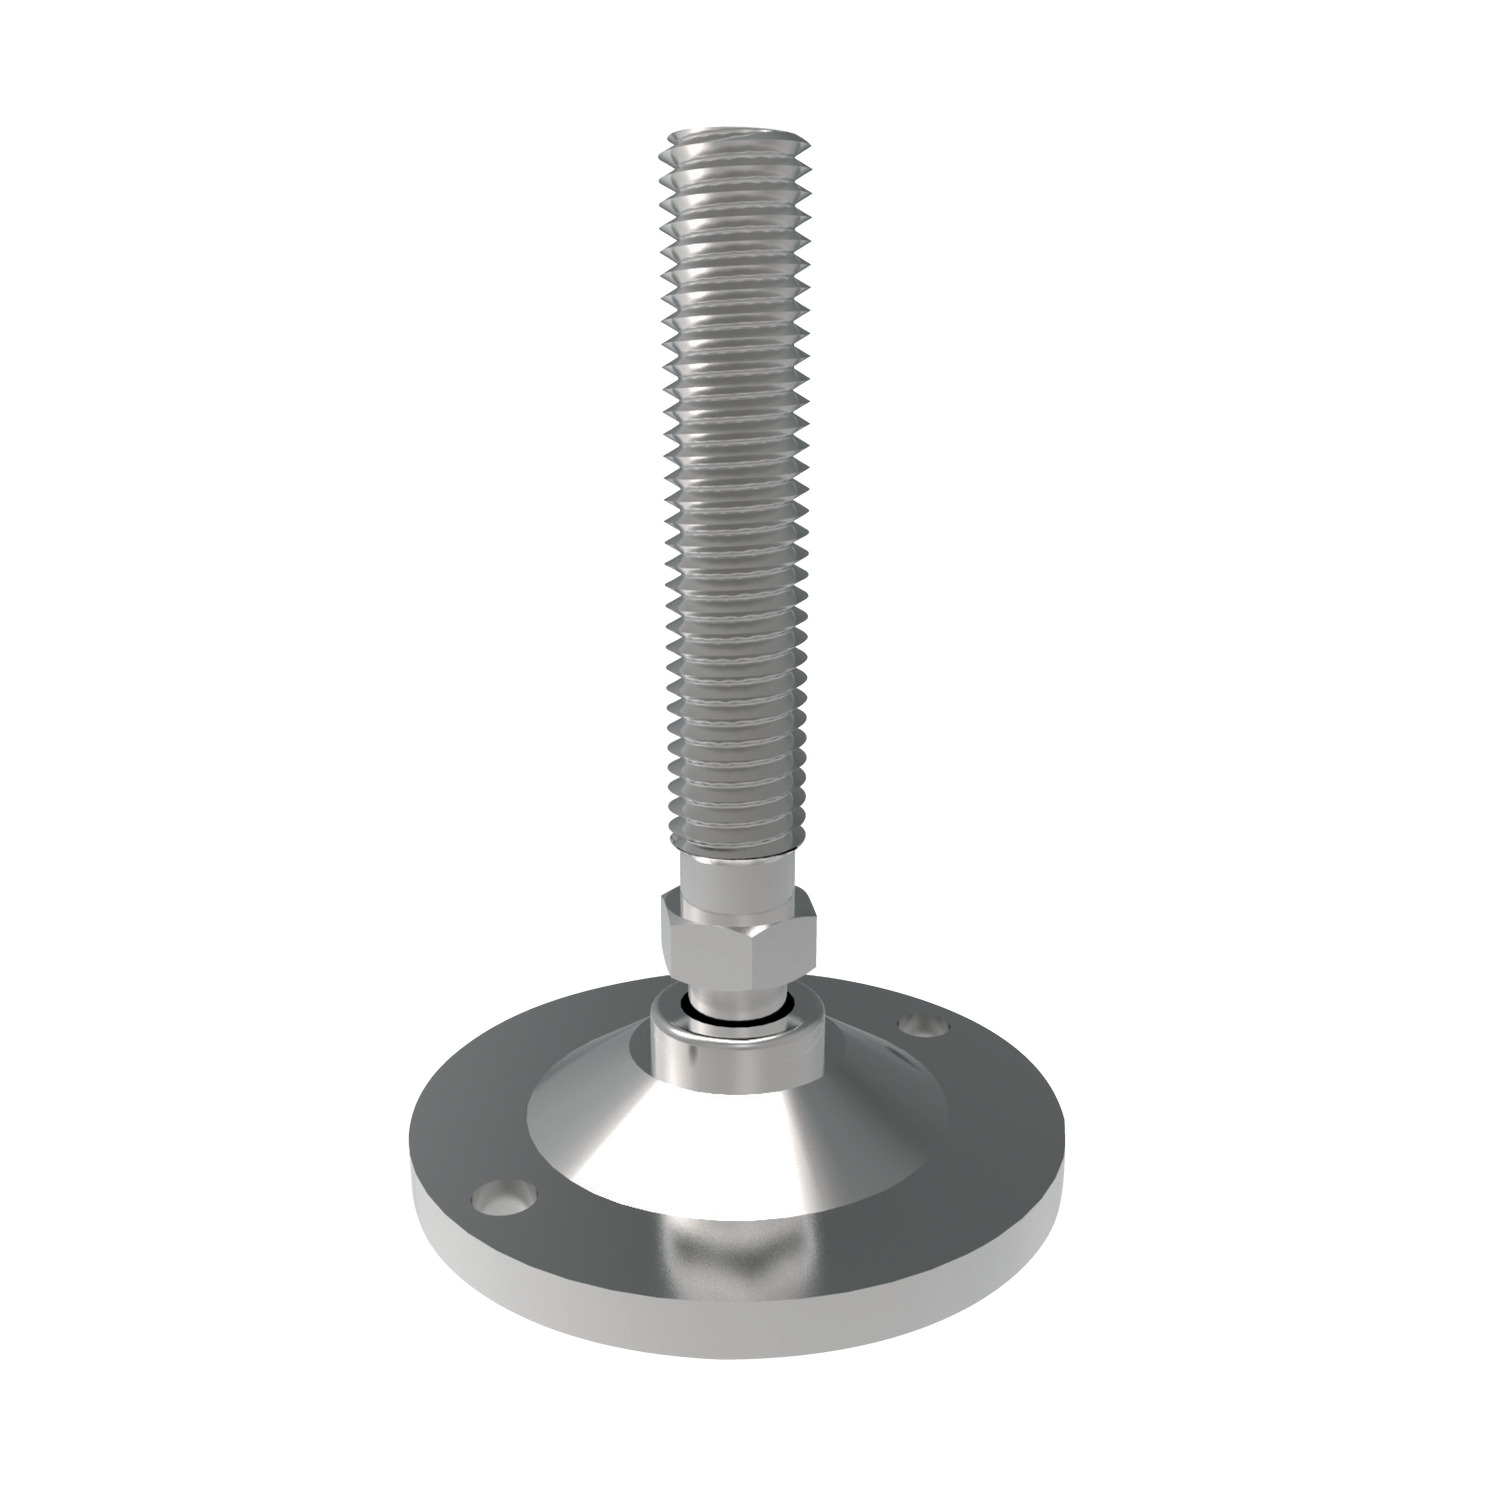 Product 34702, Levelling Feet - Bolt Down pad and bolt steel / 